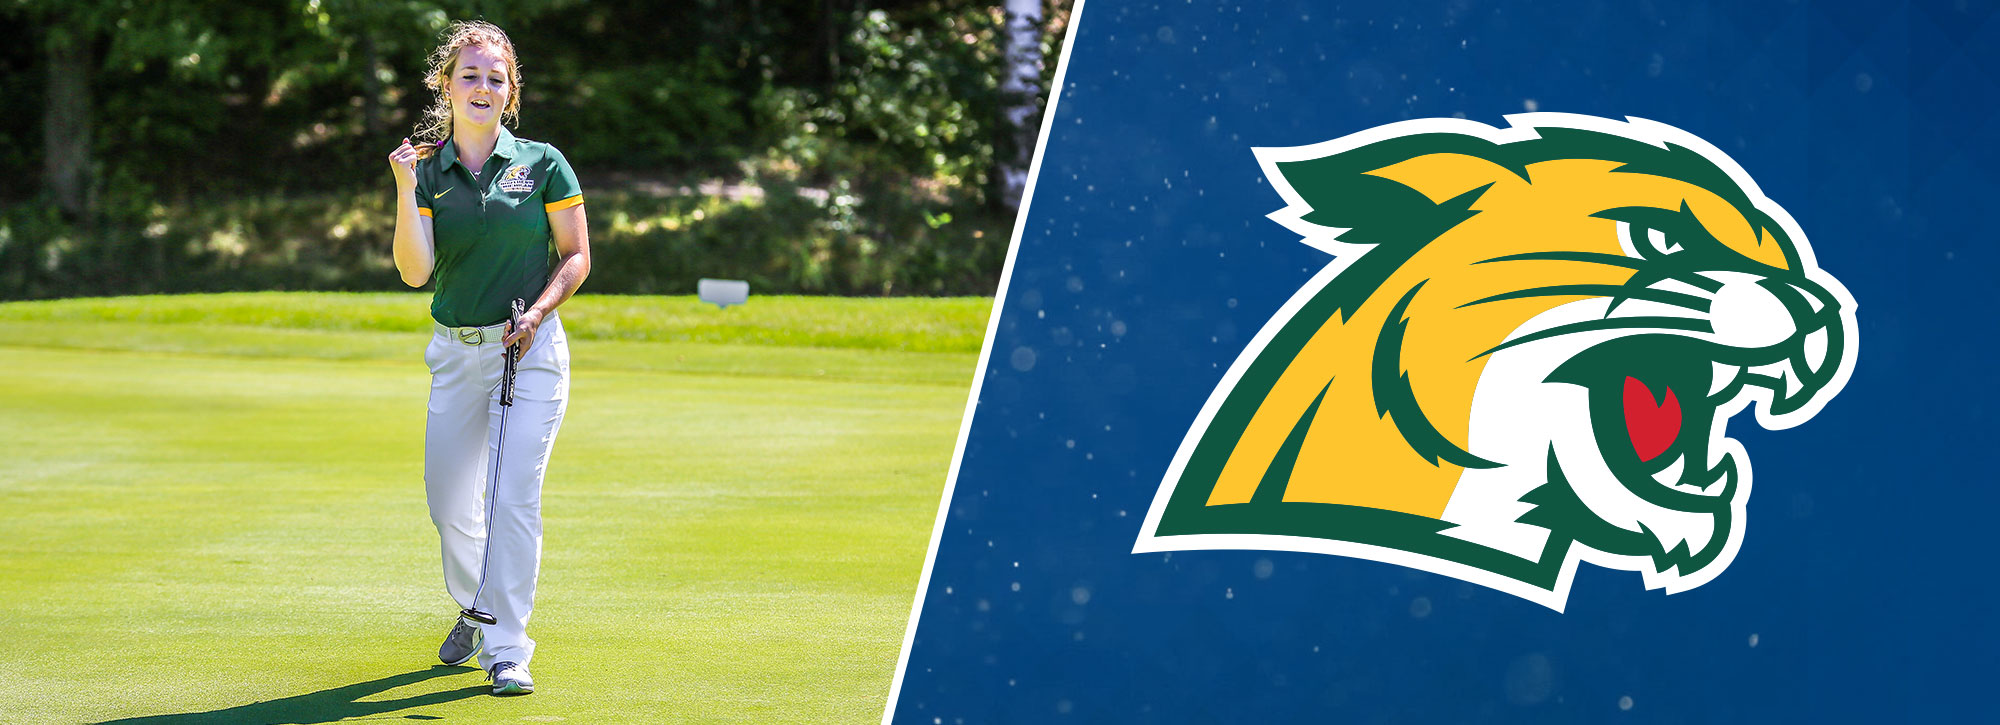 NMU Golfer's Courageous Actions Demonstrate Importance of Life-Saving Certifications